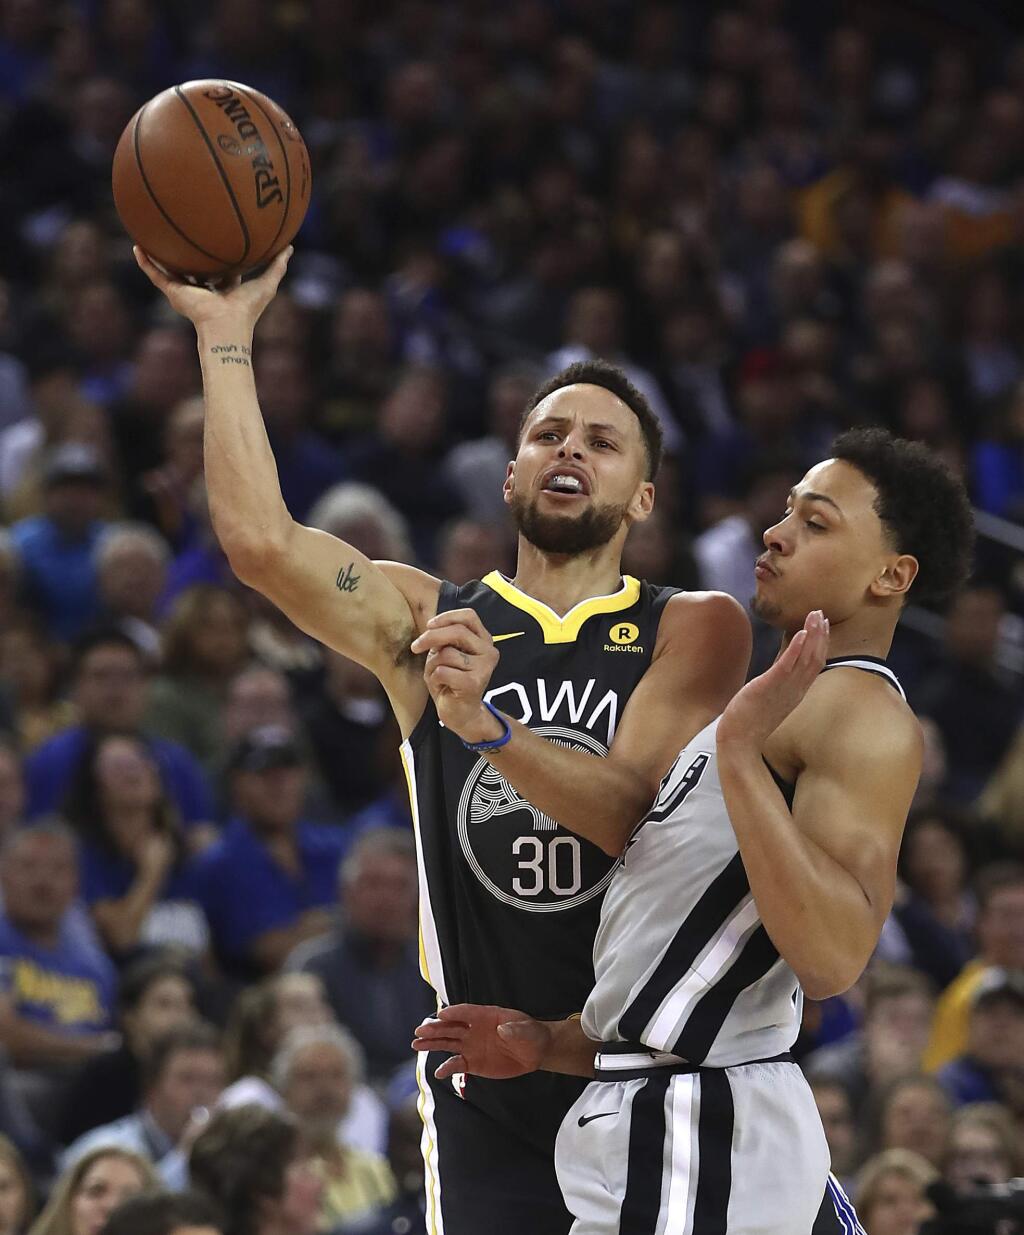 The Golden State Warriors' Stephen Curry, left, shoots over the San Antonio Spurs' Bryn Forbes during the first half Saturday, Feb. 10, 2018, in Oakland. (AP Photo/Ben Margot)